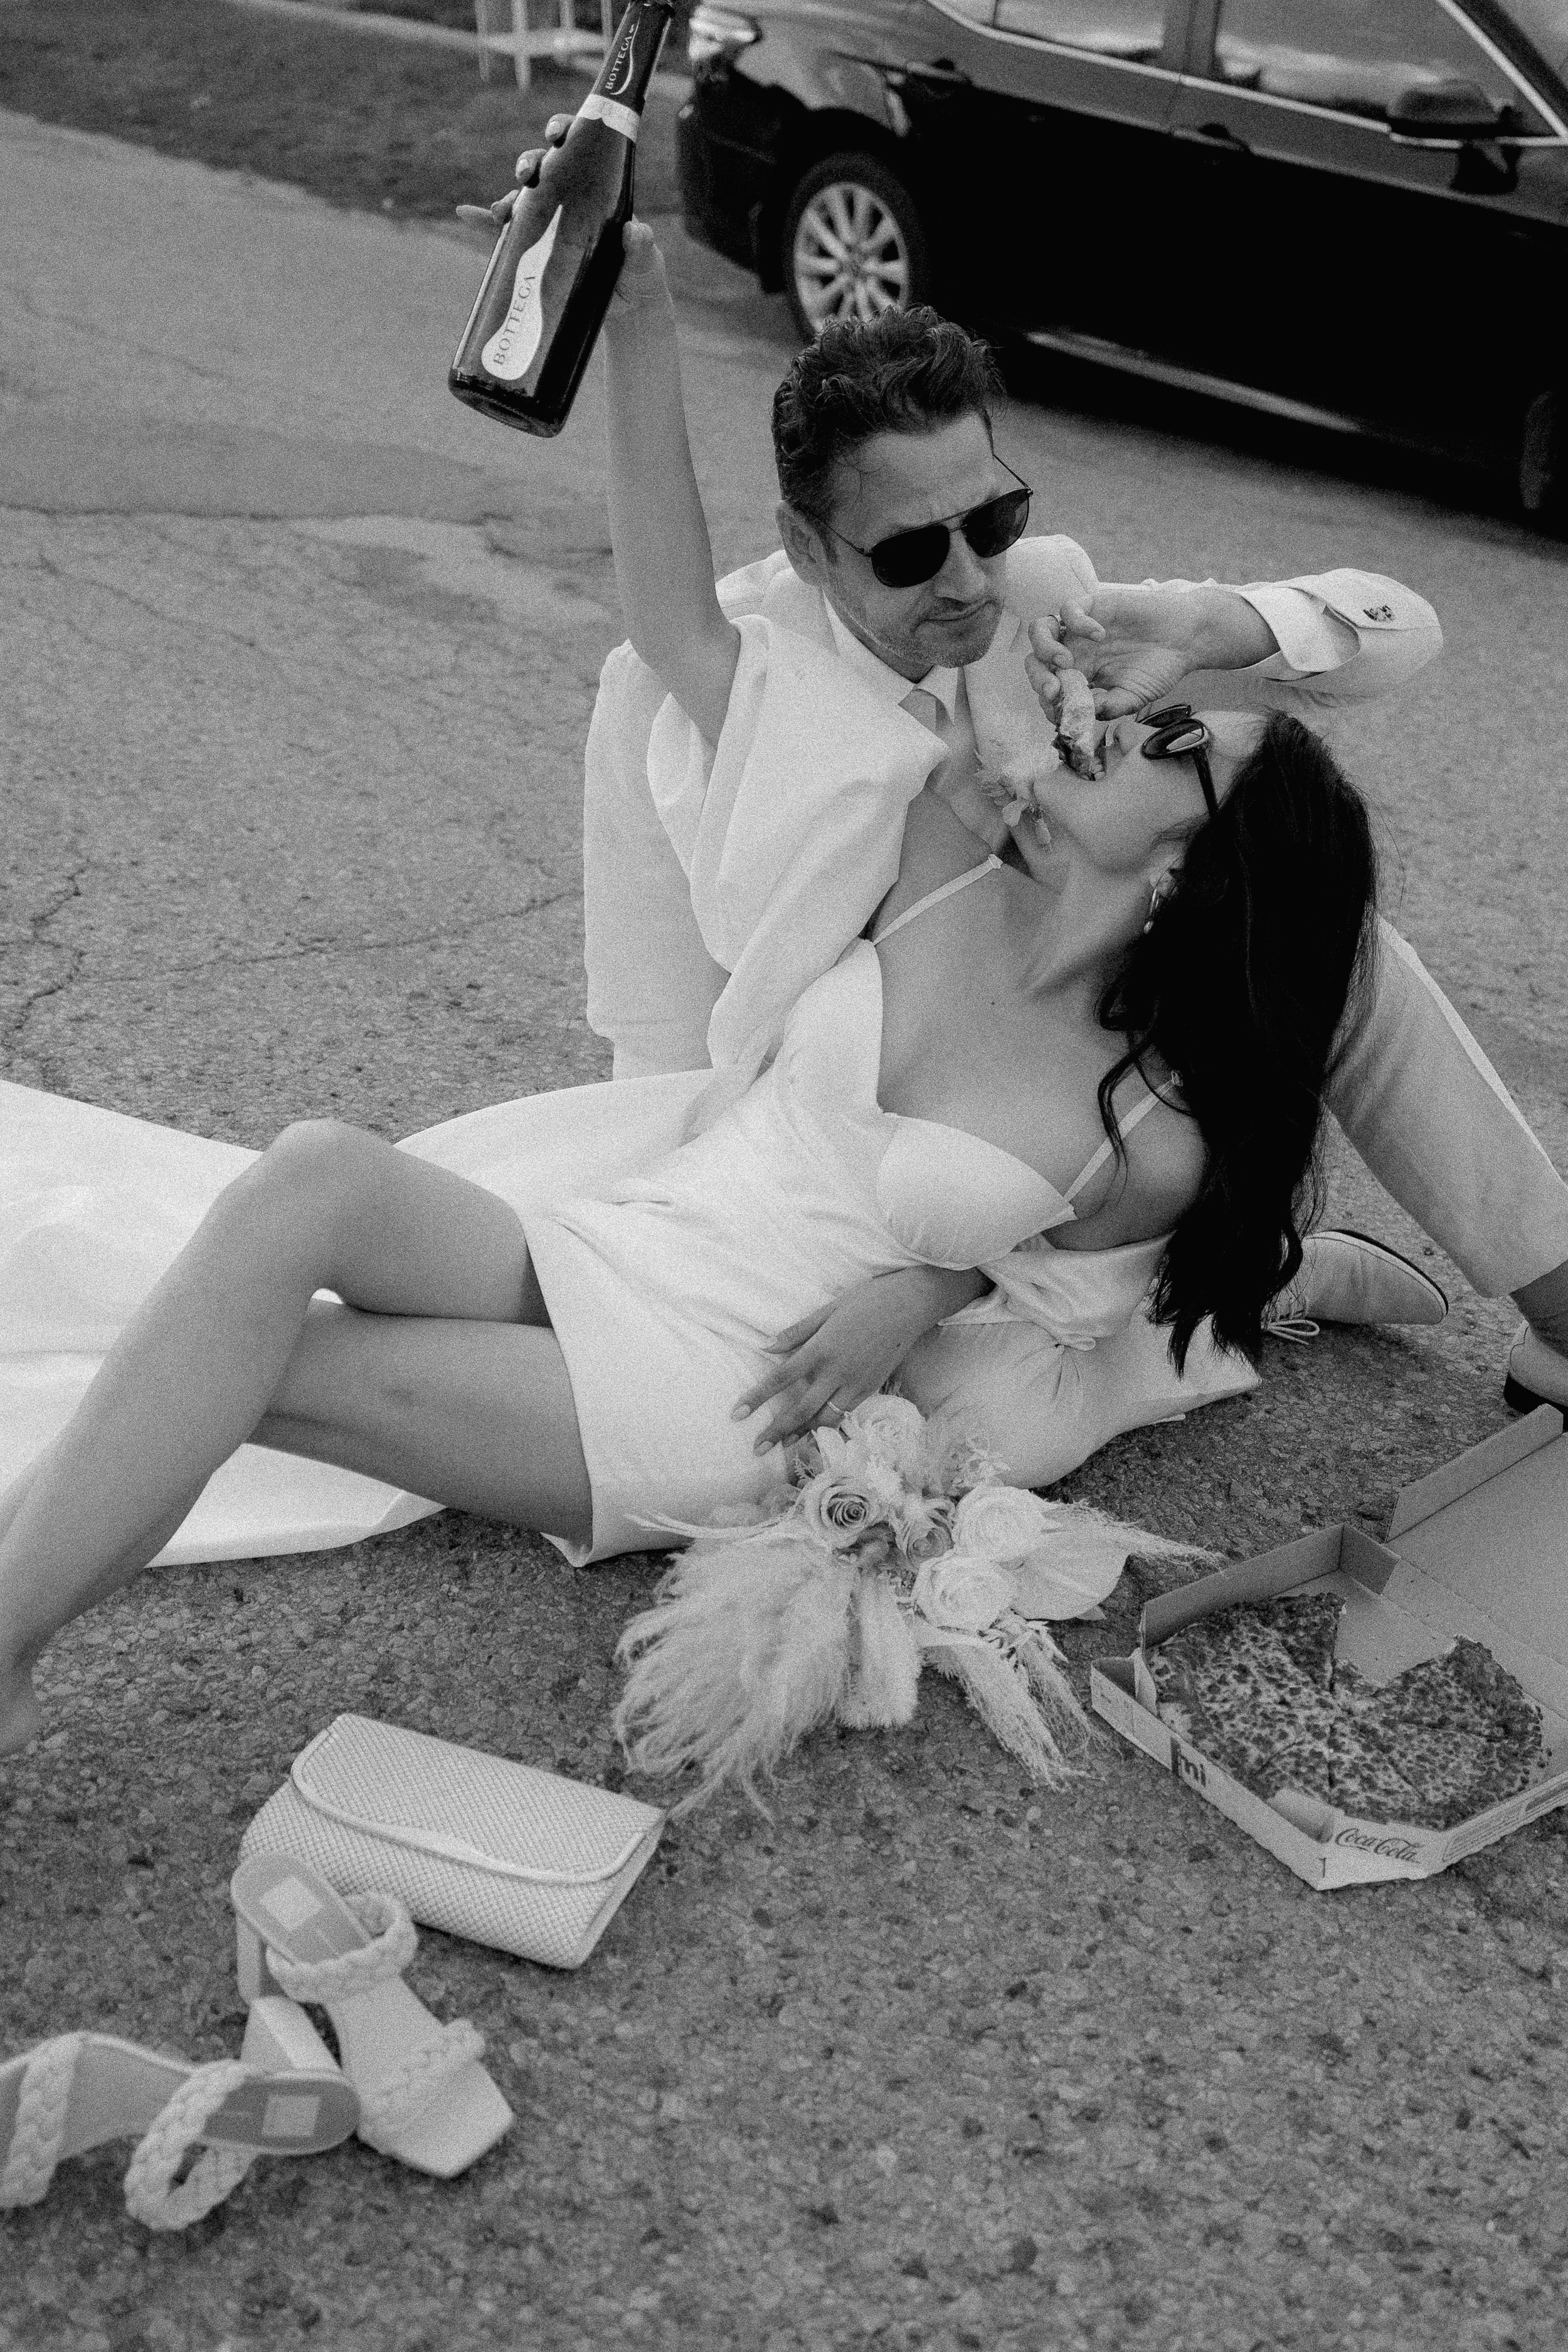 groom feeding bride pizza while bride lays on his lap and holds champagne bottle in hand